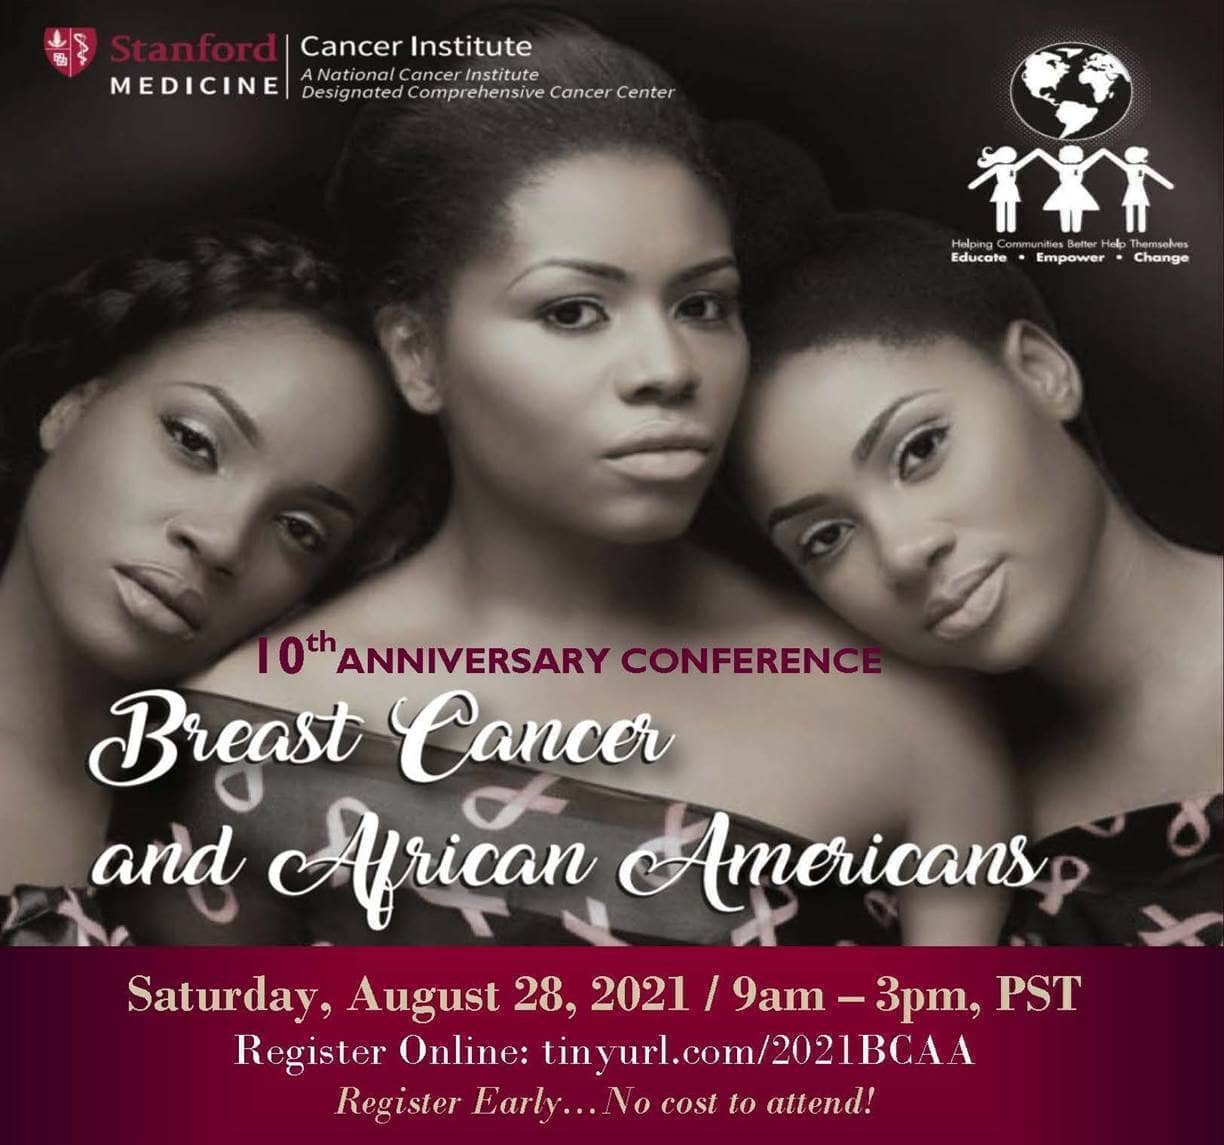 Breast-Cancer-0821, Stanford Cancer Institute’s 10th anniversary conference: Breast Cancer and African Americans, Local News & Views 